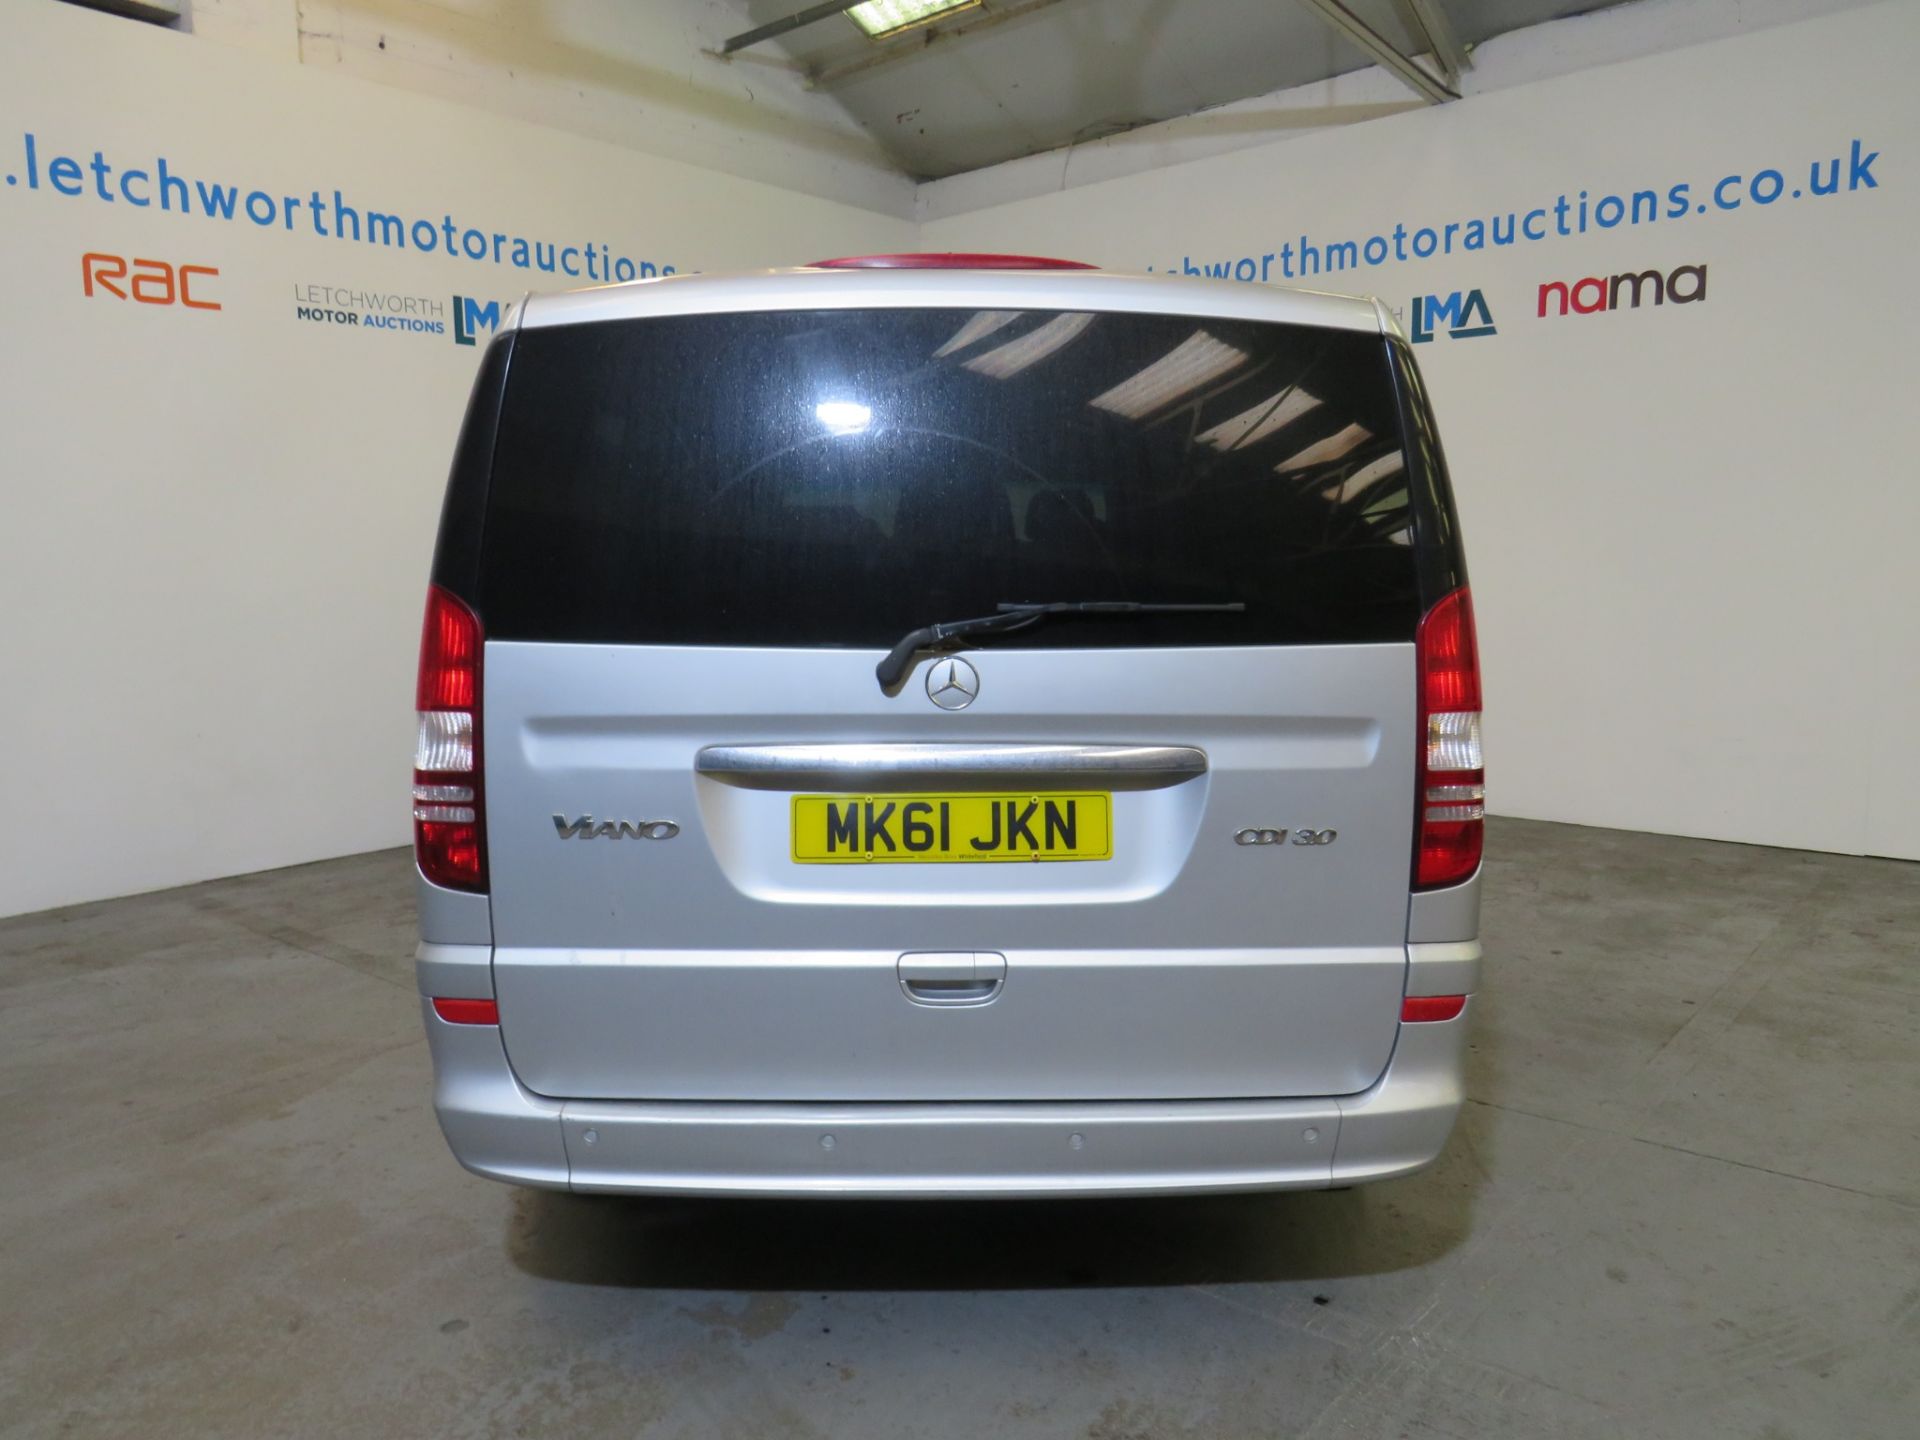 2011 Mercedes Benz Viano Ambient 3.0 CDI Blue Auto 8 Seater - 2987cc - Image 5 of 10